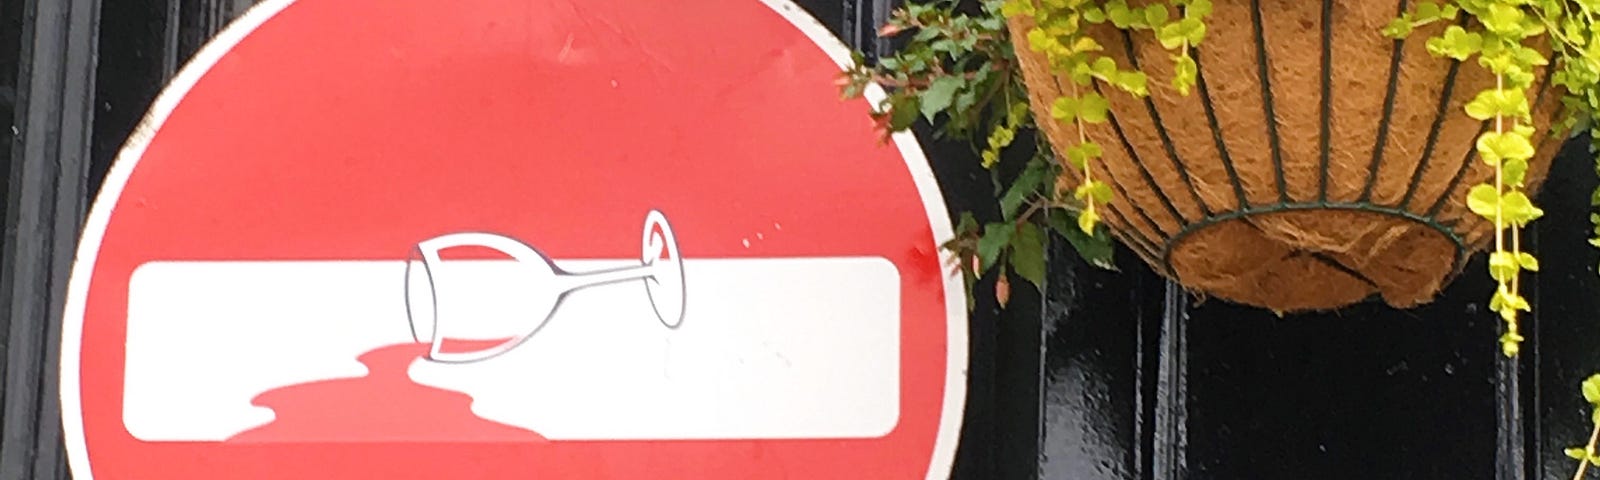 No Entry sign with an empty wine glass superimposed to look as if the red circle of the sign is spilled red wine.